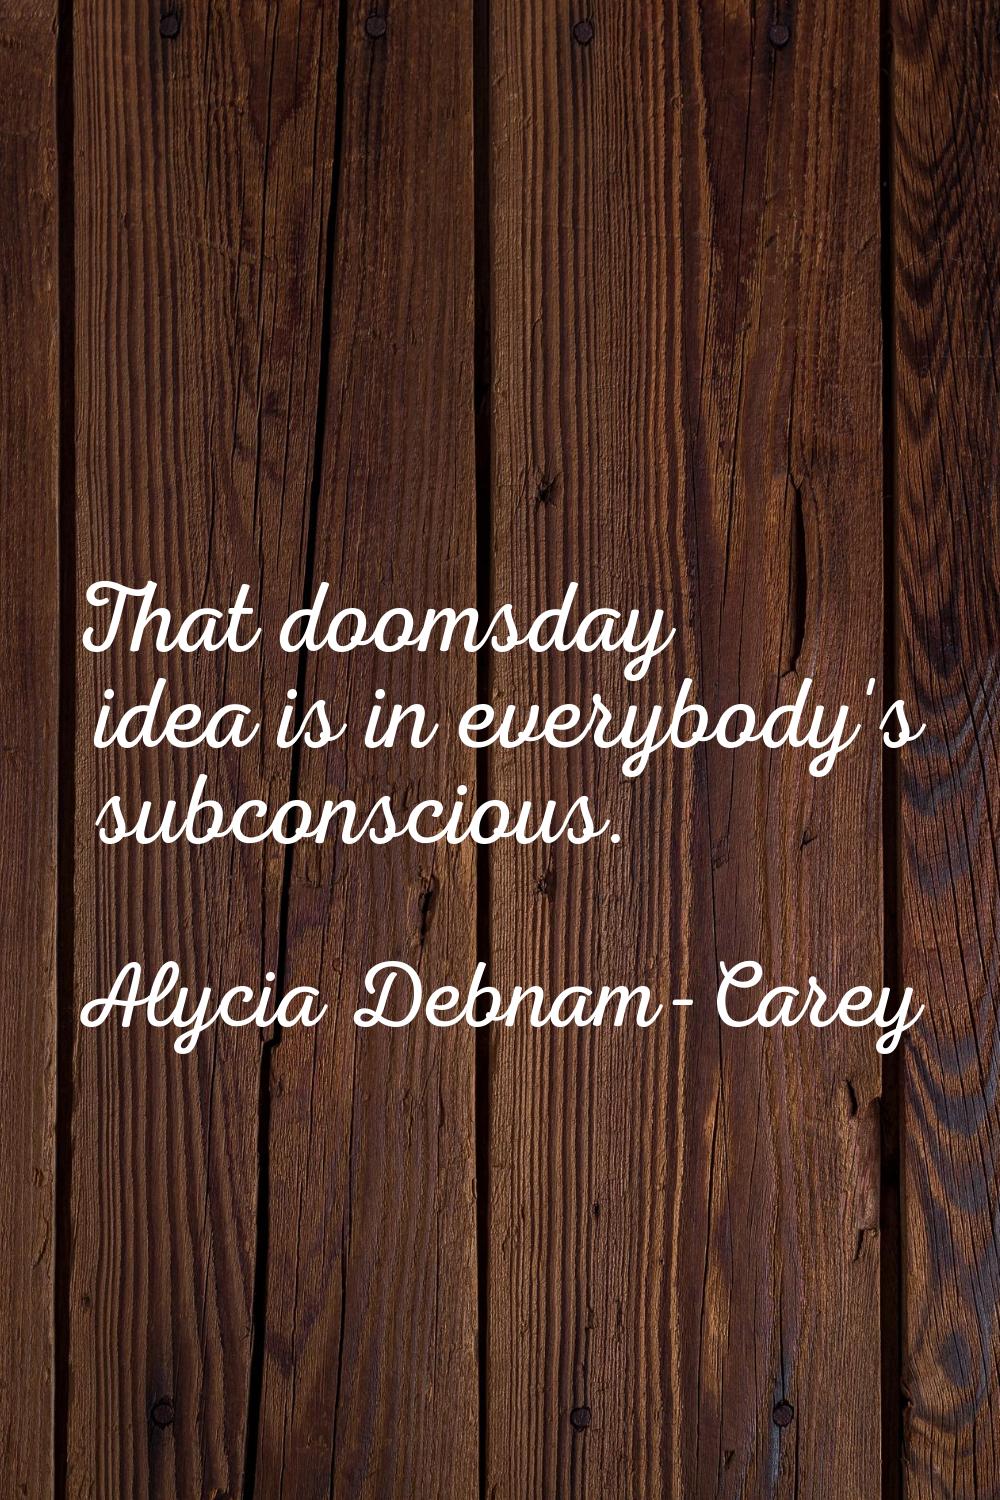 That doomsday idea is in everybody's subconscious.